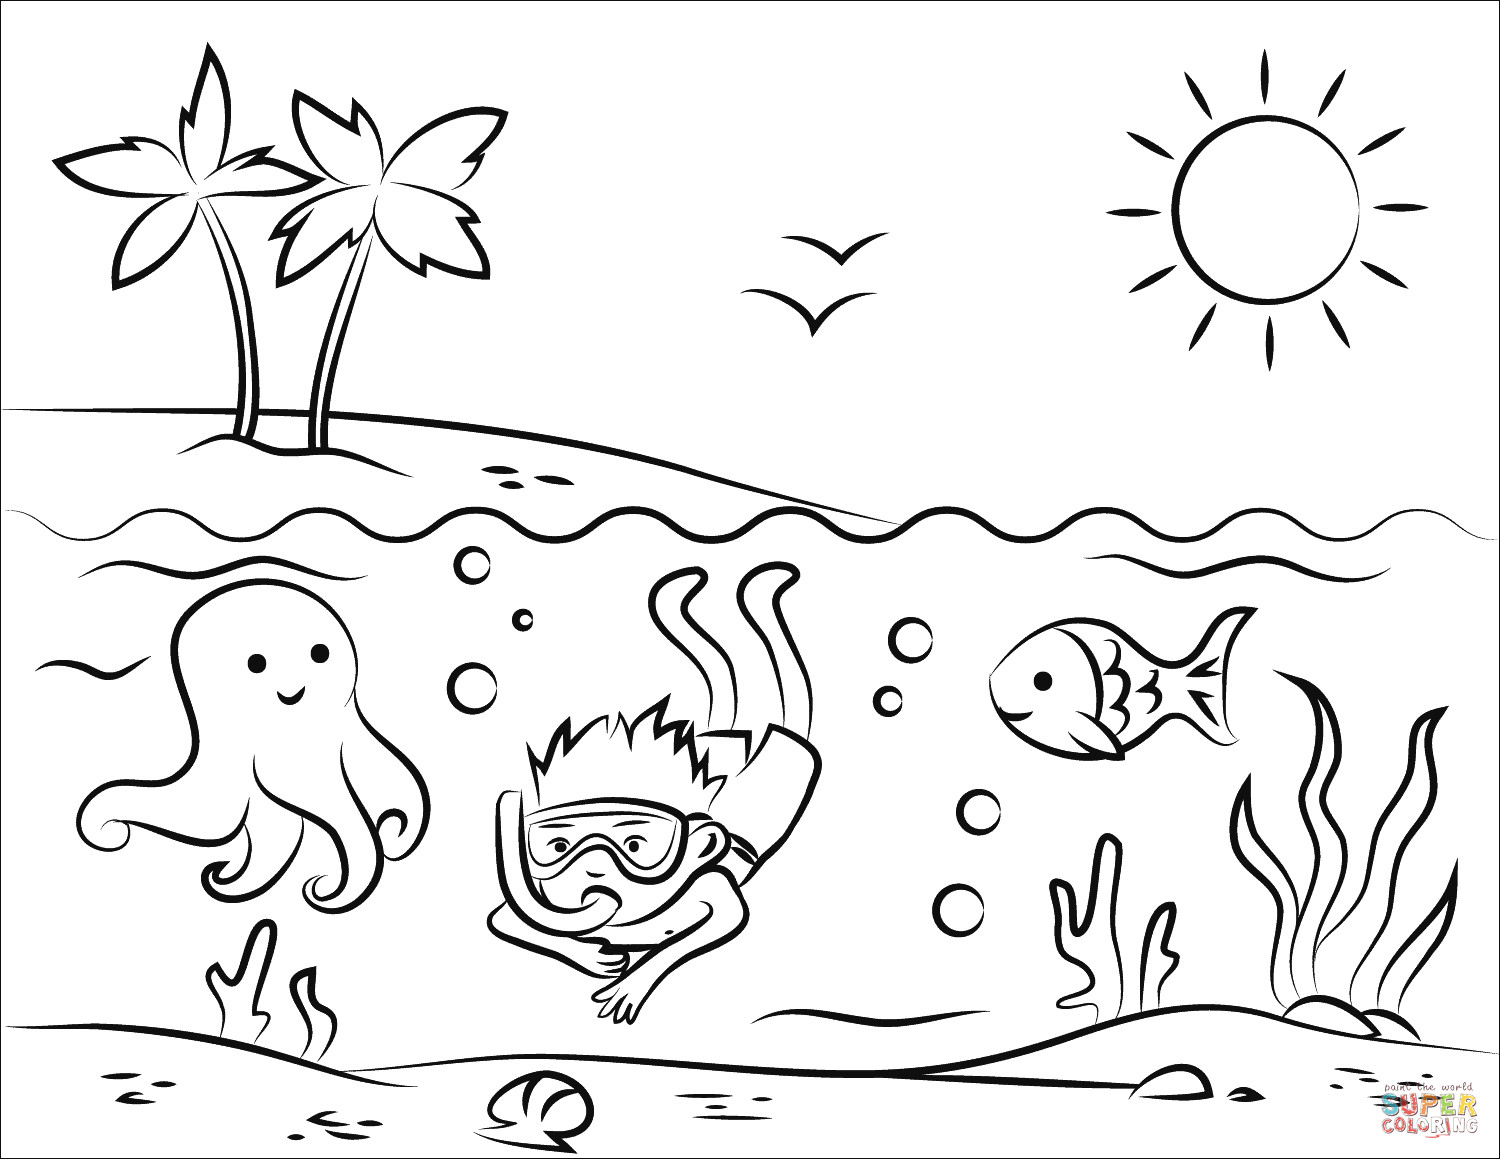 Sunset Beach Coloring Page - 101+ Popular SVG File